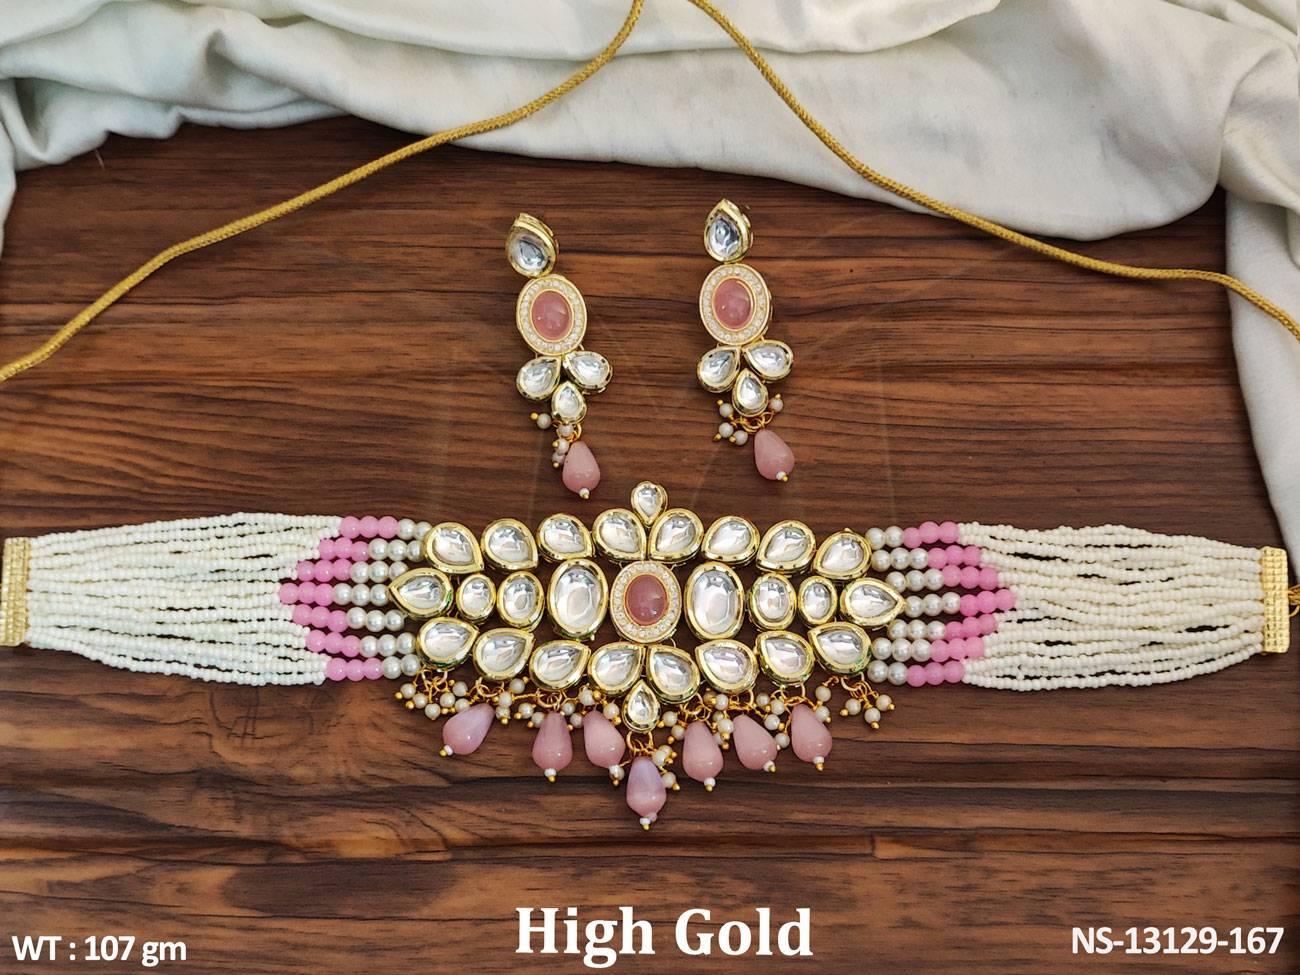 This Designer Party wear Kundan Choker Necklace Set features exquisite Kundan stones and a high gold polish,